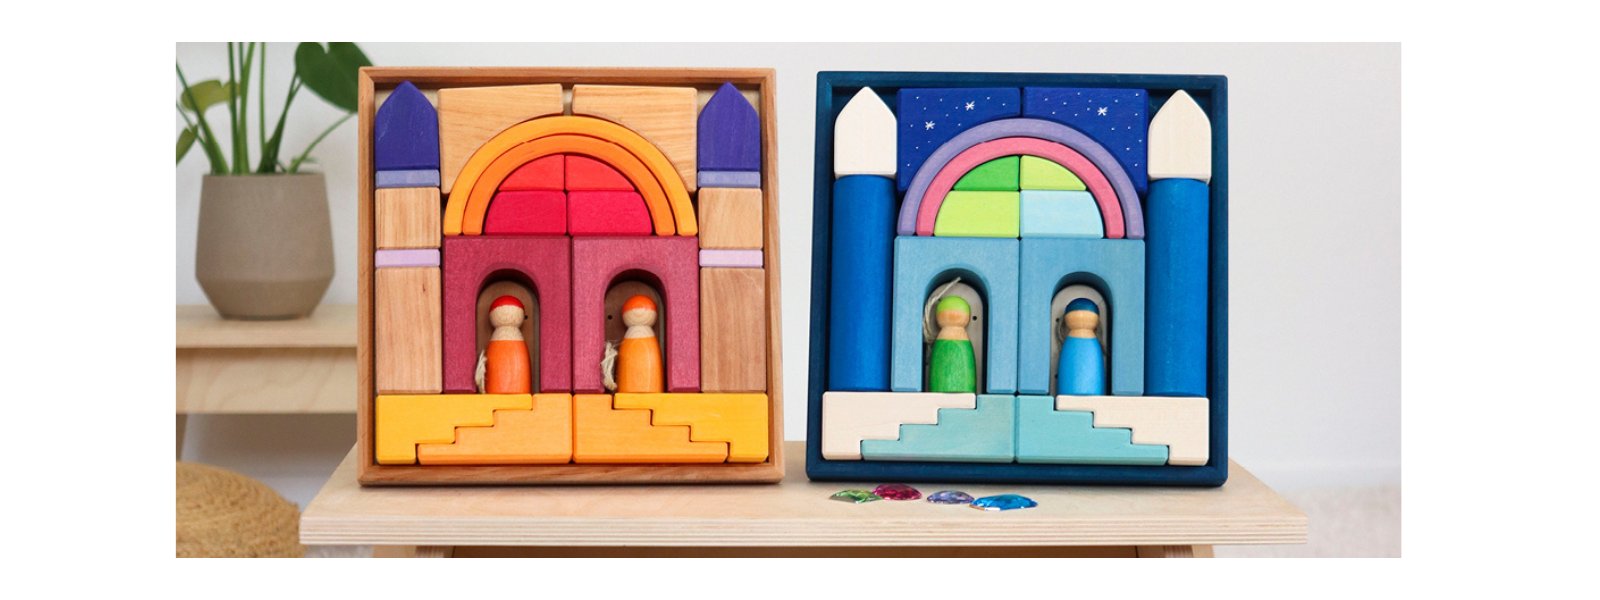 Grimm's Toys - Grimm's Wooden Toys | The Natural Baby Company